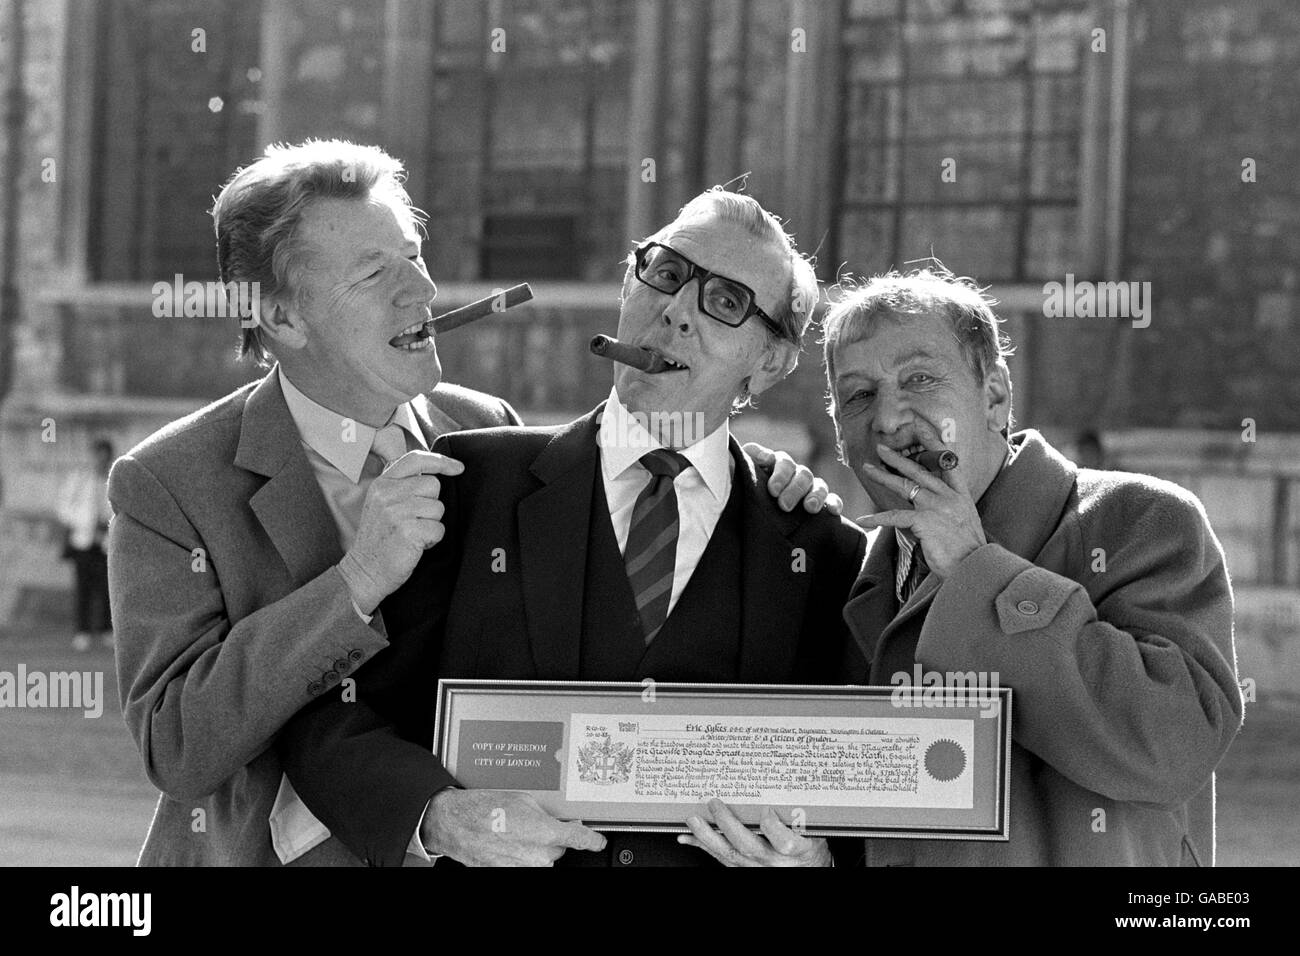 Comedy actor Eric Sykes (centre), taking a break from rehearsals for Peter Pan in which he co-stars with Lulu at the Manchester Opera House, is congratulated by his cigar-puffing friends, singer Max Bygraves (left) and scriptwriter Johnny Speight, after his admittance to the Freedom of the City of London at Guildhall, London today. Stock Photo